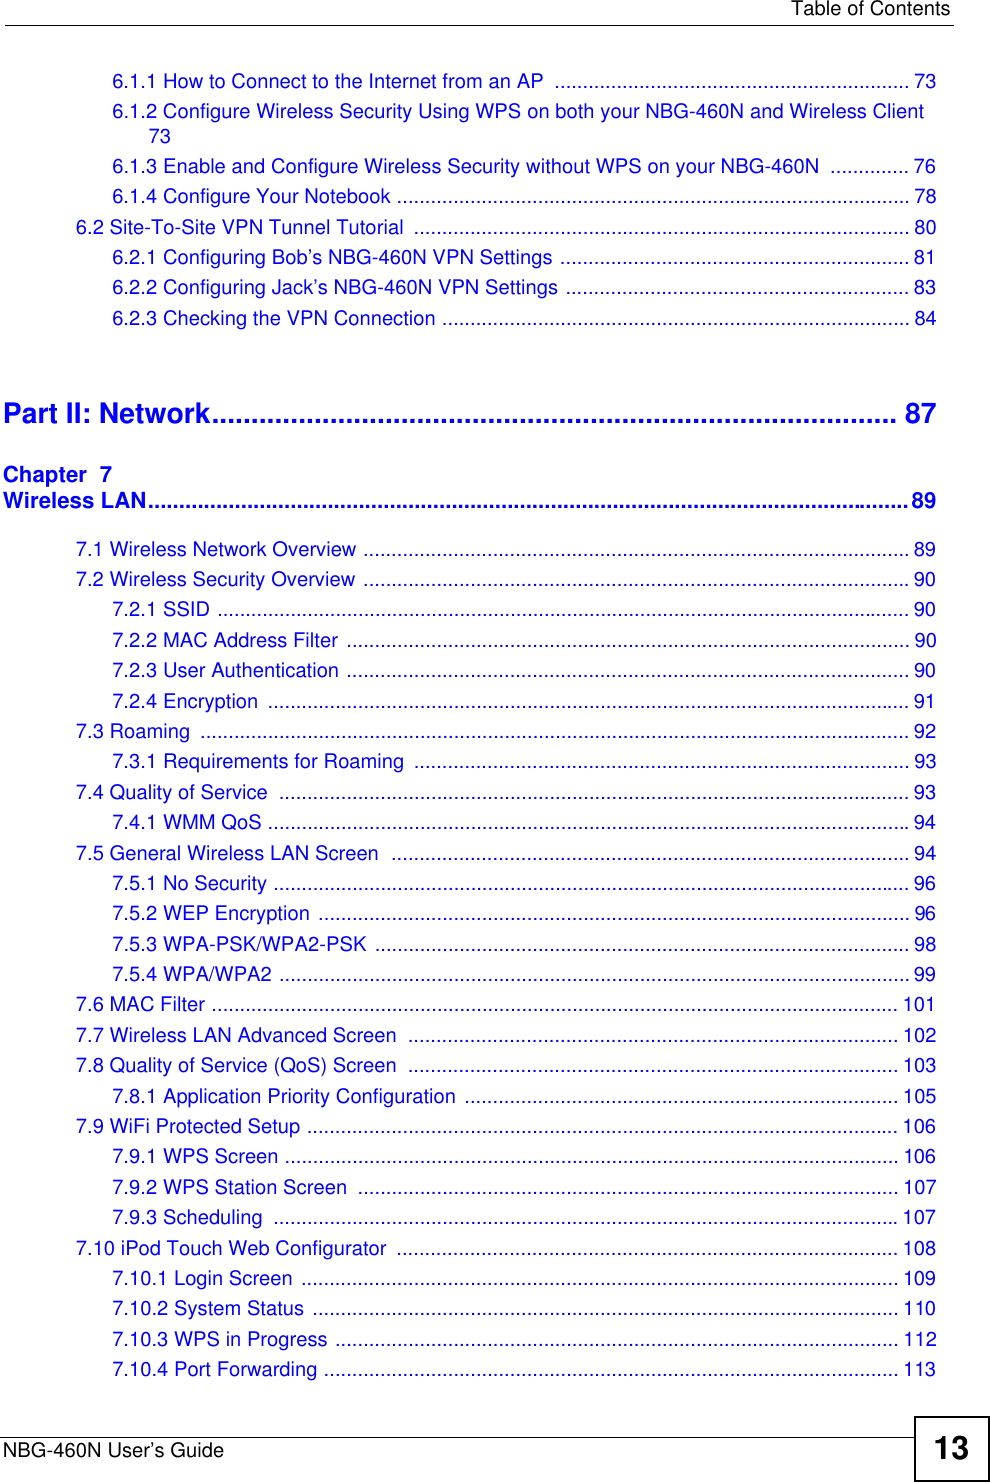   Table of ContentsNBG-460N User’s Guide 136.1.1 How to Connect to the Internet from an AP  ............................................................... 736.1.2 Configure Wireless Security Using WPS on both your NBG-460N and Wireless Client 736.1.3 Enable and Configure Wireless Security without WPS on your NBG-460N  .............. 766.1.4 Configure Your Notebook ........................................................................................... 786.2 Site-To-Site VPN Tunnel Tutorial  ........................................................................................ 806.2.1 Configuring Bob’s NBG-460N VPN Settings .............................................................. 816.2.2 Configuring Jack’s NBG-460N VPN Settings ............................................................. 836.2.3 Checking the VPN Connection ................................................................................... 84Part II: Network....................................................................................... 87Chapter  7Wireless LAN...........................................................................................................................897.1 Wireless Network Overview ................................................................................................. 897.2 Wireless Security Overview .................................................................................................907.2.1 SSID ........................................................................................................................... 907.2.2 MAC Address Filter .................................................................................................... 907.2.3 User Authentication .................................................................................................... 907.2.4 Encryption  .................................................................................................................. 917.3 Roaming  .............................................................................................................................. 927.3.1 Requirements for Roaming  ........................................................................................ 937.4 Quality of Service  ................................................................................................................ 937.4.1 WMM QoS ..................................................................................................................947.5 General Wireless LAN Screen  ............................................................................................ 947.5.1 No Security ................................................................................................................. 967.5.2 WEP Encryption ......................................................................................................... 967.5.3 WPA-PSK/WPA2-PSK ............................................................................................... 987.5.4 WPA/WPA2 ................................................................................................................ 997.6 MAC Filter .......................................................................................................................... 1017.7 Wireless LAN Advanced Screen  ....................................................................................... 1027.8 Quality of Service (QoS) Screen  ....................................................................................... 1037.8.1 Application Priority Configuration ............................................................................. 1057.9 WiFi Protected Setup ......................................................................................................... 1067.9.1 WPS Screen ............................................................................................................. 1067.9.2 WPS Station Screen  ................................................................................................ 1077.9.3 Scheduling  ...............................................................................................................1077.10 iPod Touch Web Configurator  ......................................................................................... 1087.10.1 Login Screen .......................................................................................................... 1097.10.2 System Status ........................................................................................................ 1107.10.3 WPS in Progress .................................................................................................... 1127.10.4 Port Forwarding ...................................................................................................... 113